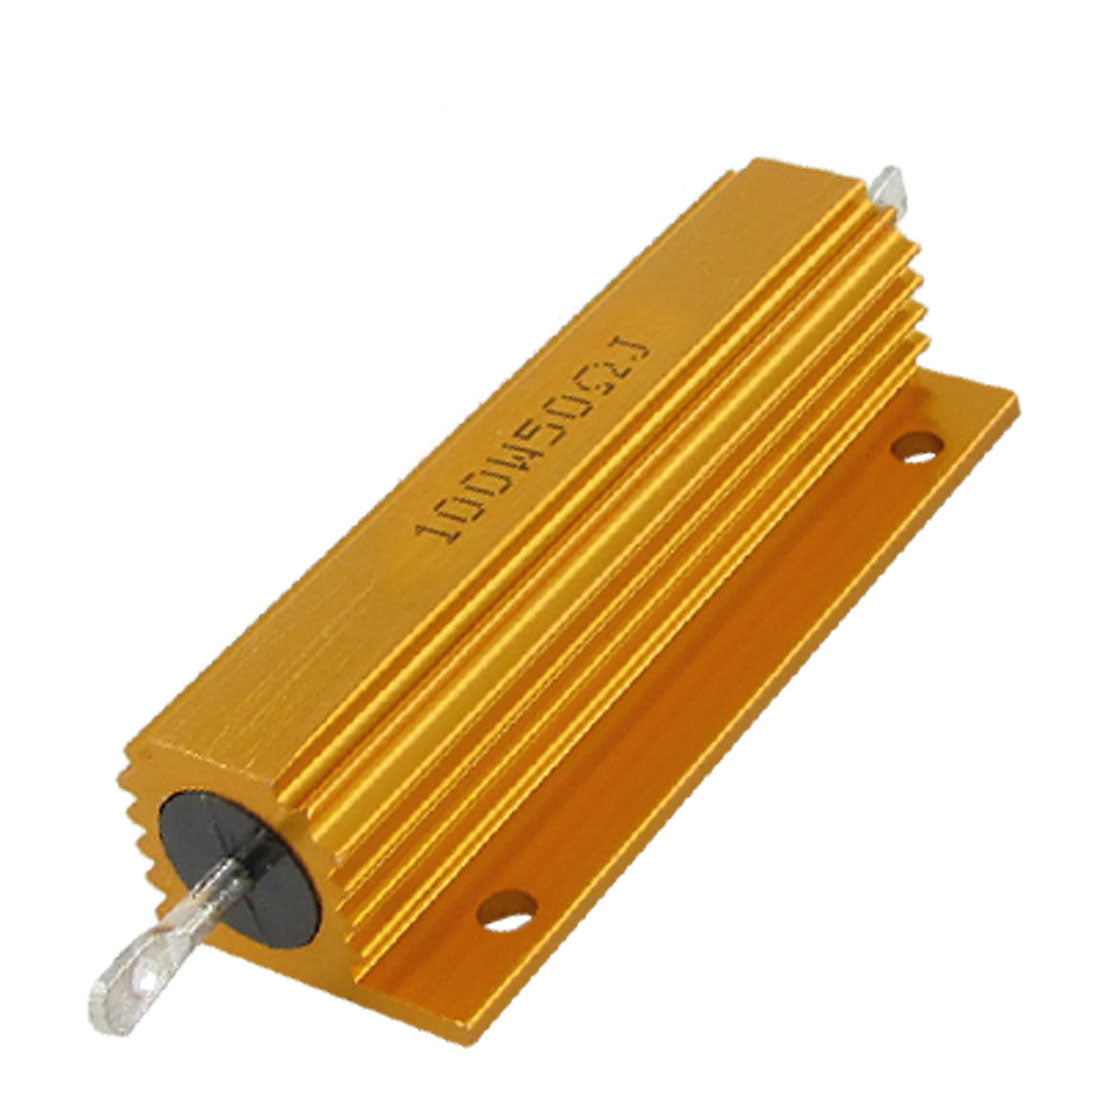 uxcell Uxcell 5% 100W 50 Ohm Resistance Aluminum Clad Resistors Gold Tone